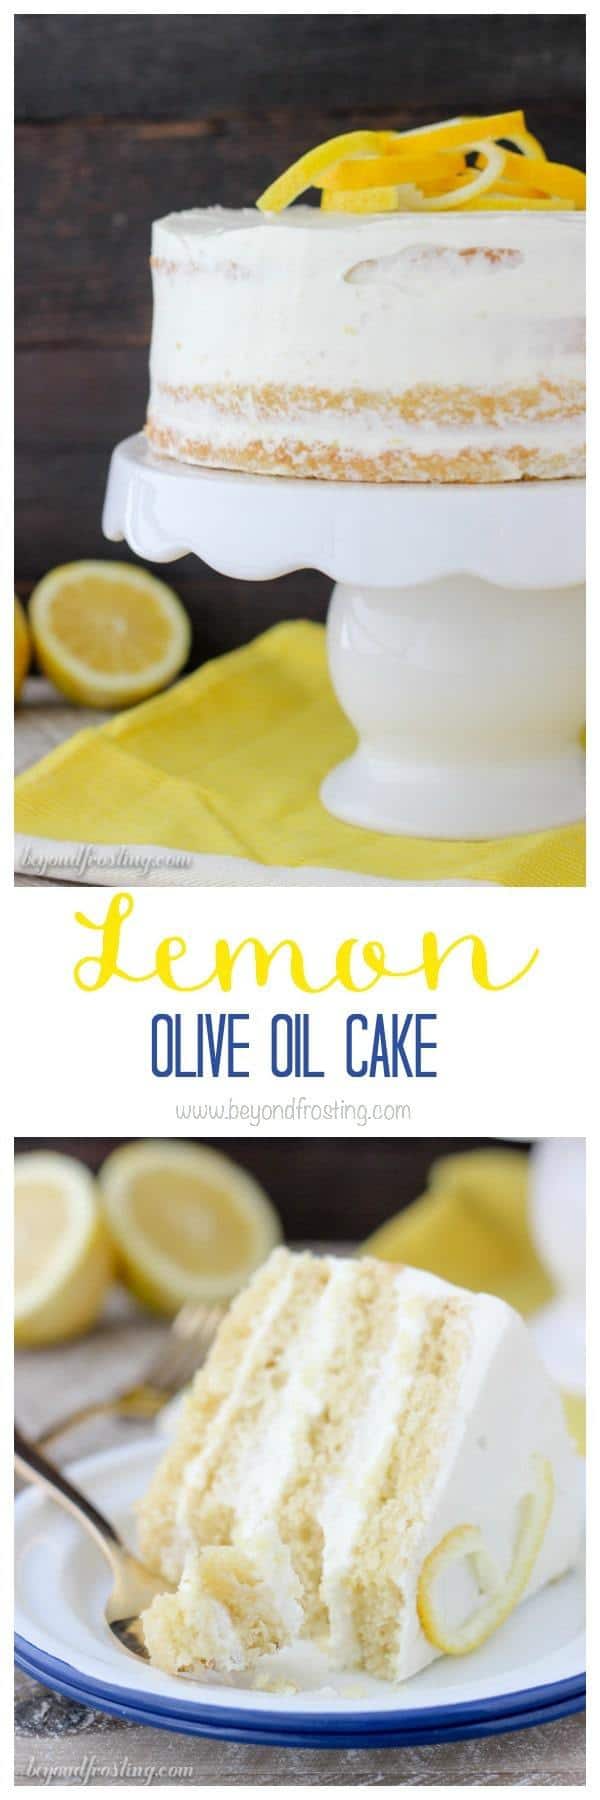 This rich Lemon Olive Oil Cake is covered with a lemon cream cheese whipped cream. The olive oil cake is extra moist and dense in texture. The lightened whipped cream frosting is infused with lemon is the perfect compliment for this cake.